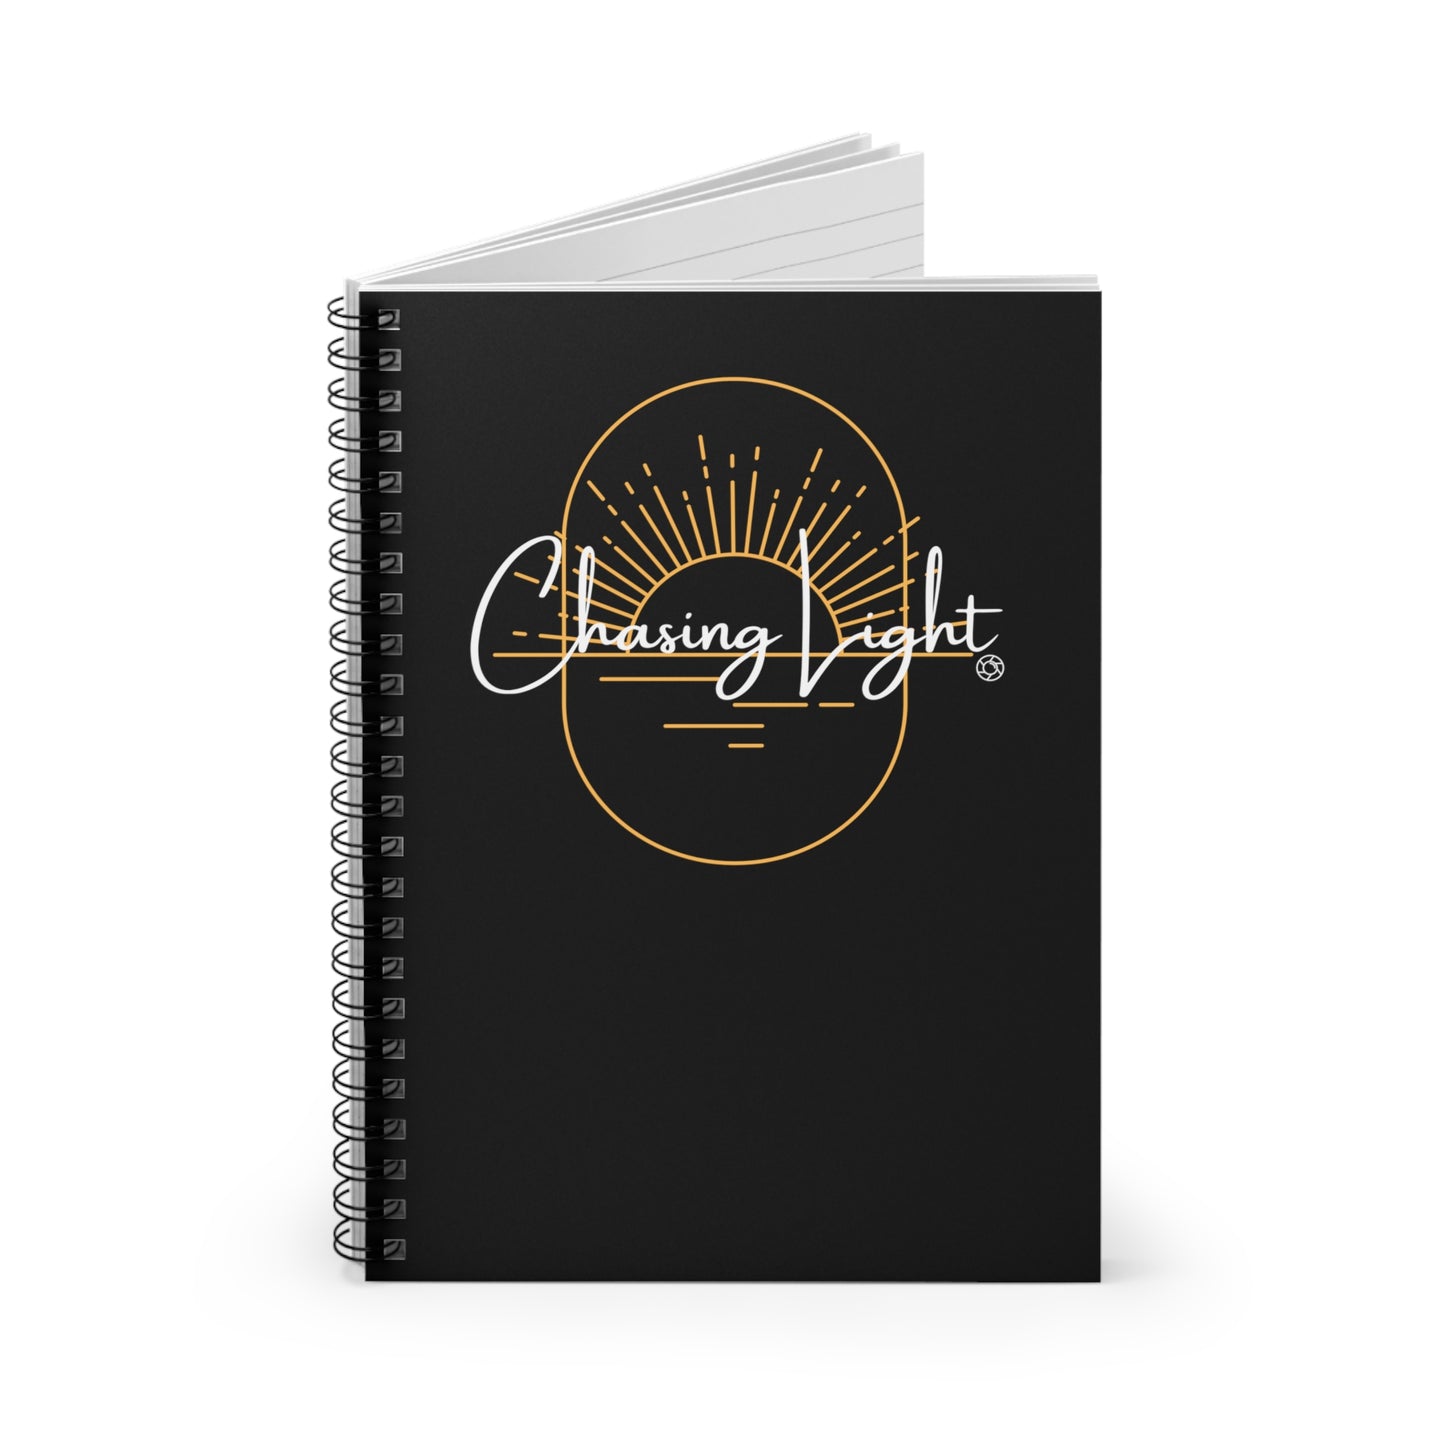 Chasing Light - Spiral Notebook - Ruled Line